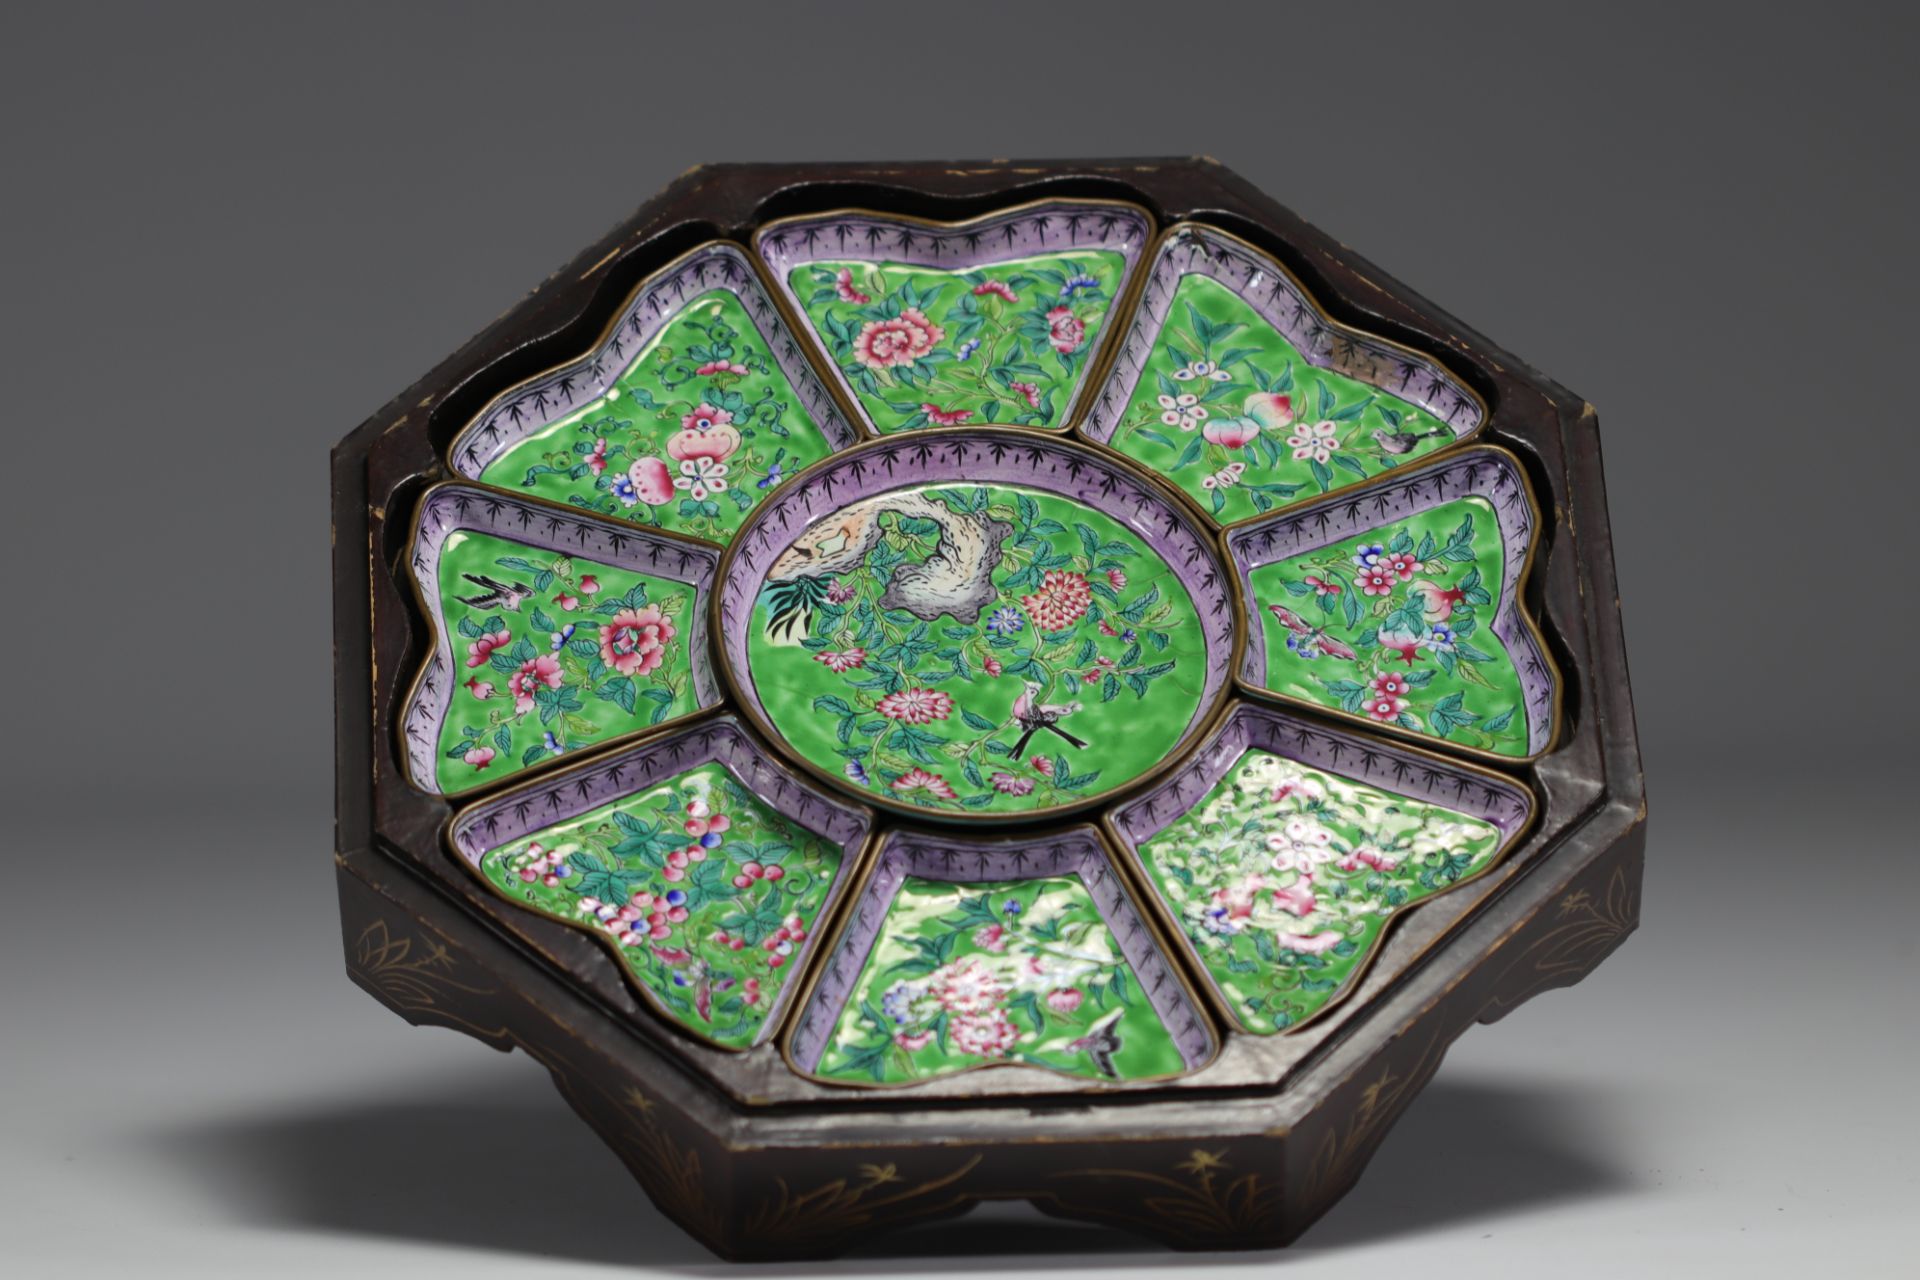 China - Set of cloisonne enamel dishes with floral and bird decor in original lacquer box, 19th cent - Bild 2 aus 4